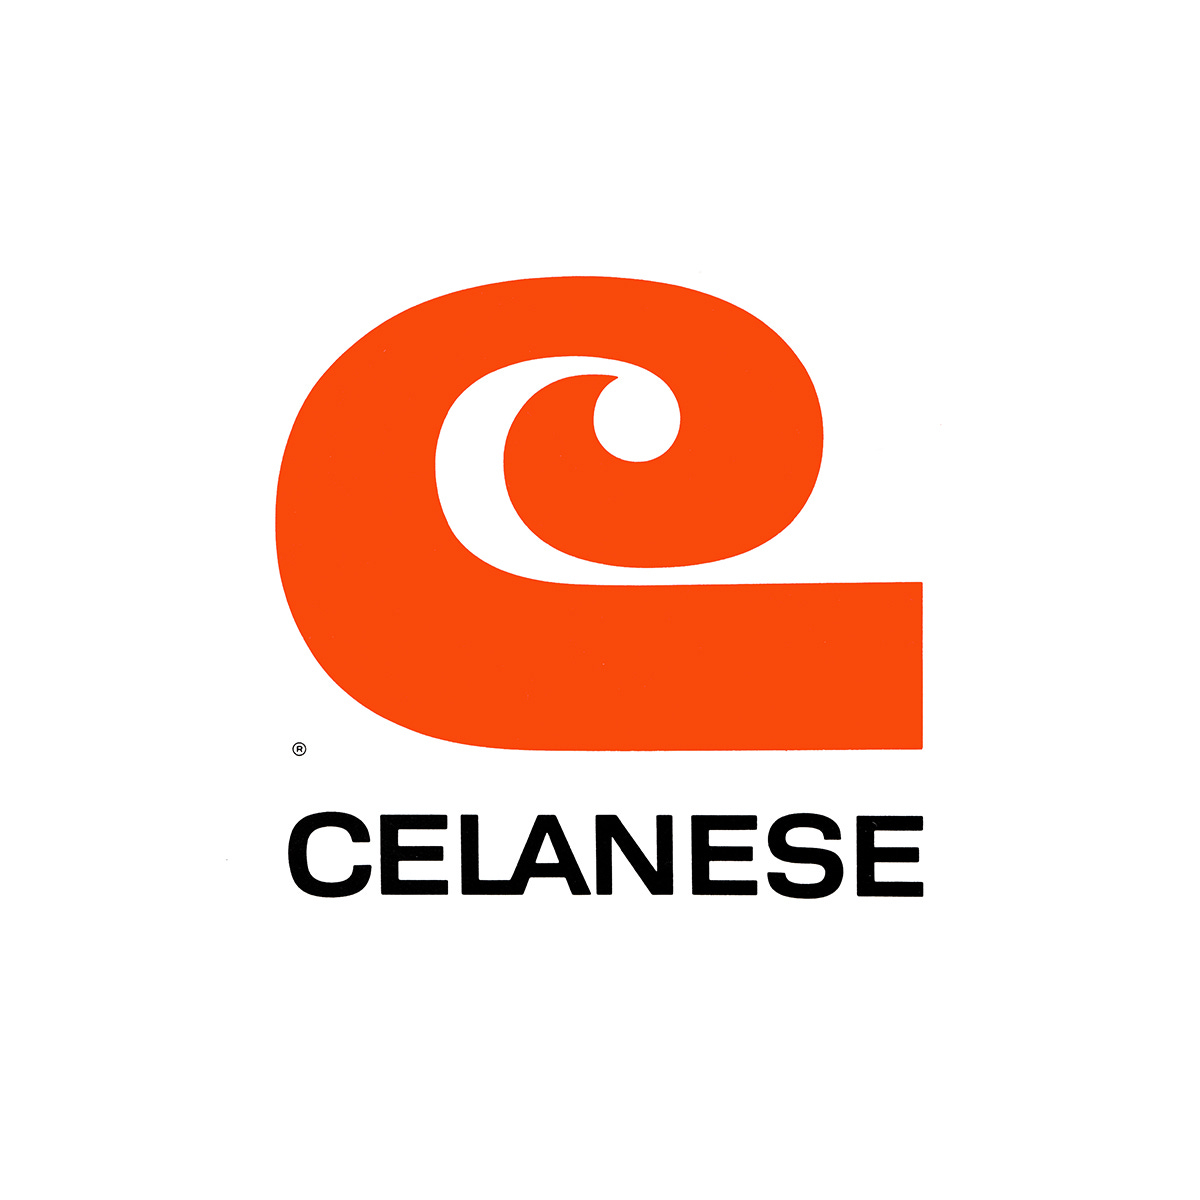 Saul Bass and Associates' 1965 logo for industrial manufacturer Celanese